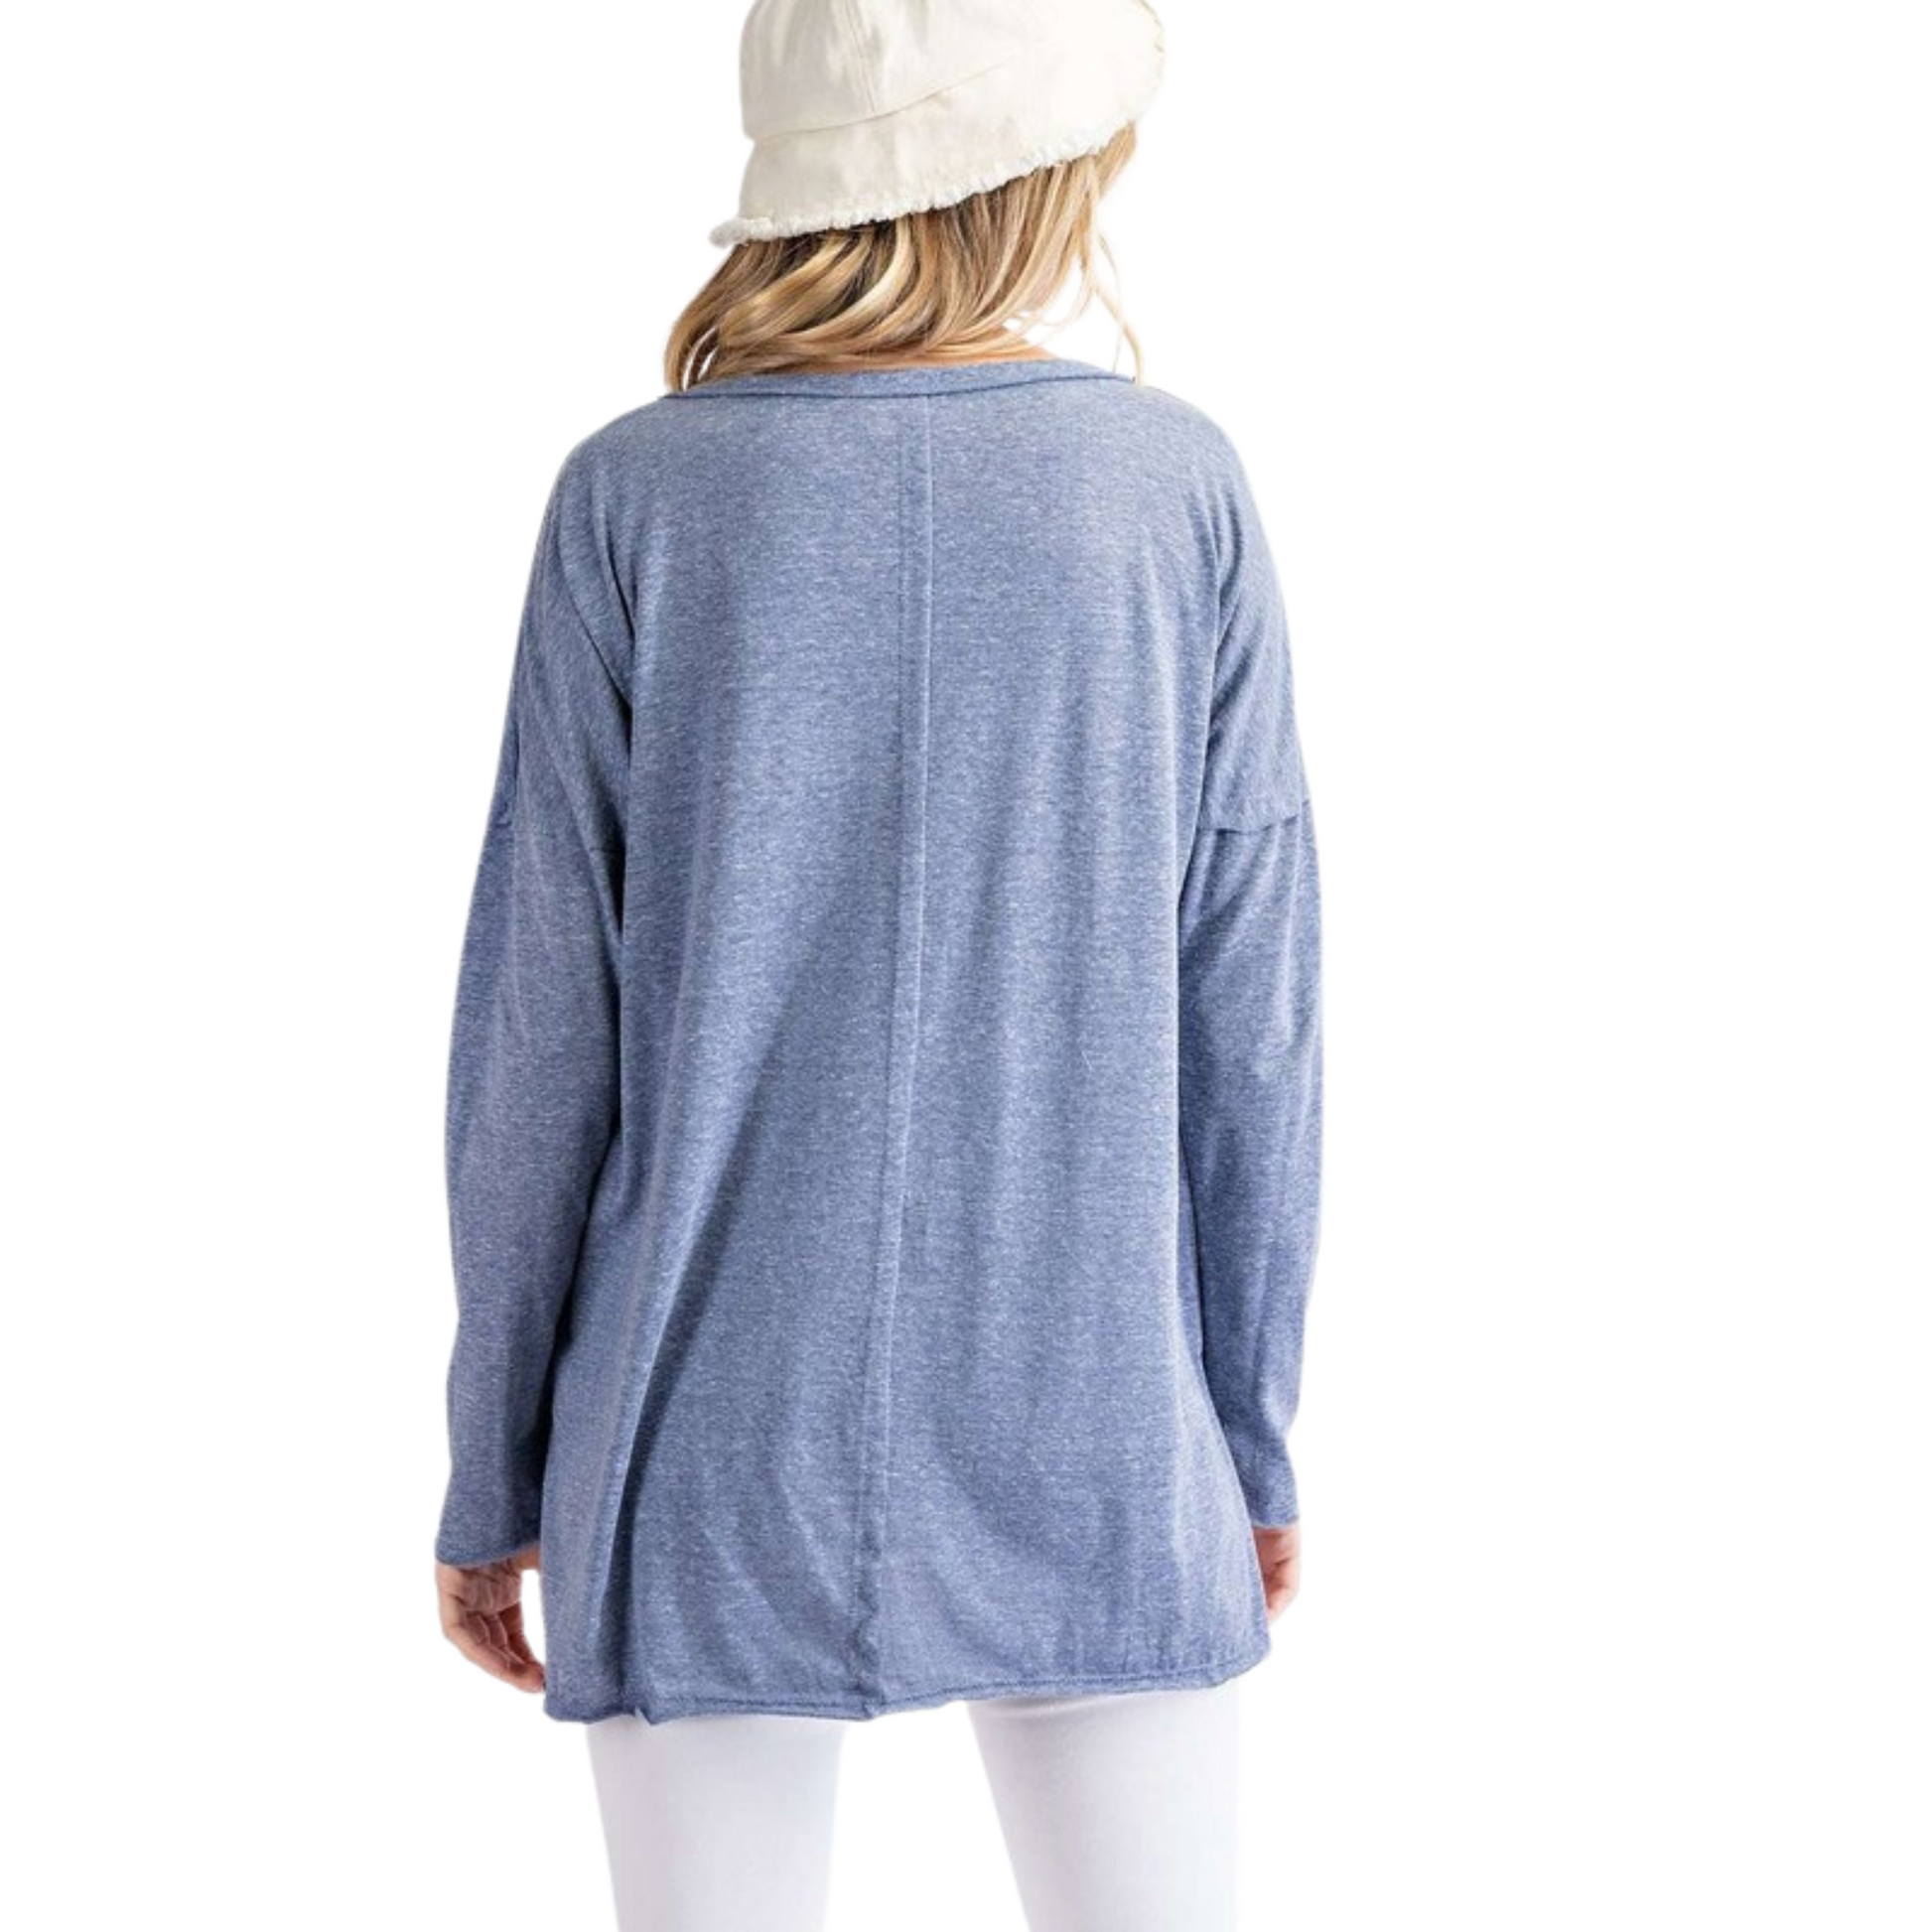 This Hi Low Knit Top is the perfect combination of comfortable and stylish. Its v neck and super soft blue knit fabric are sure to elevate your everyday look.